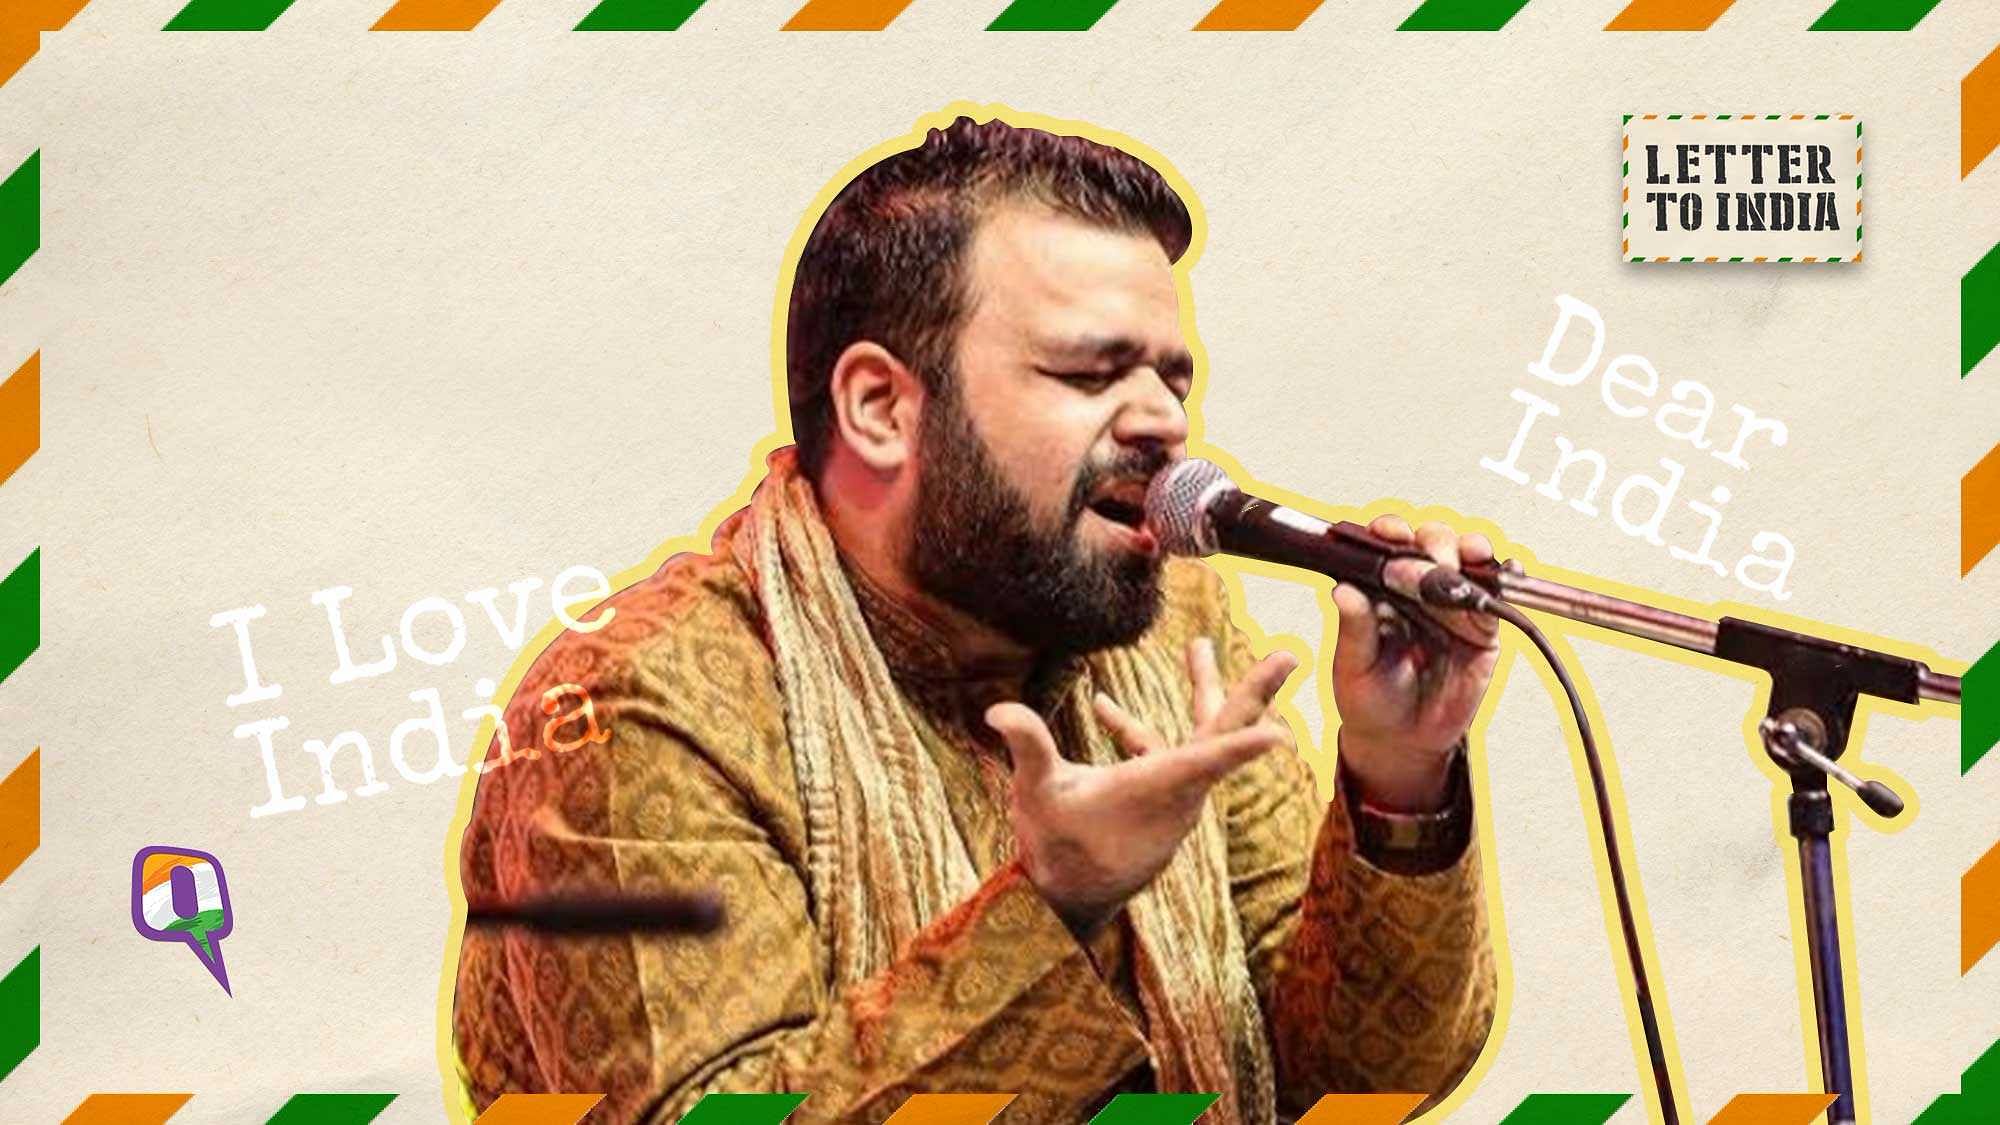 Hey India, sufi singer Dhruv Sangari has a message for you.